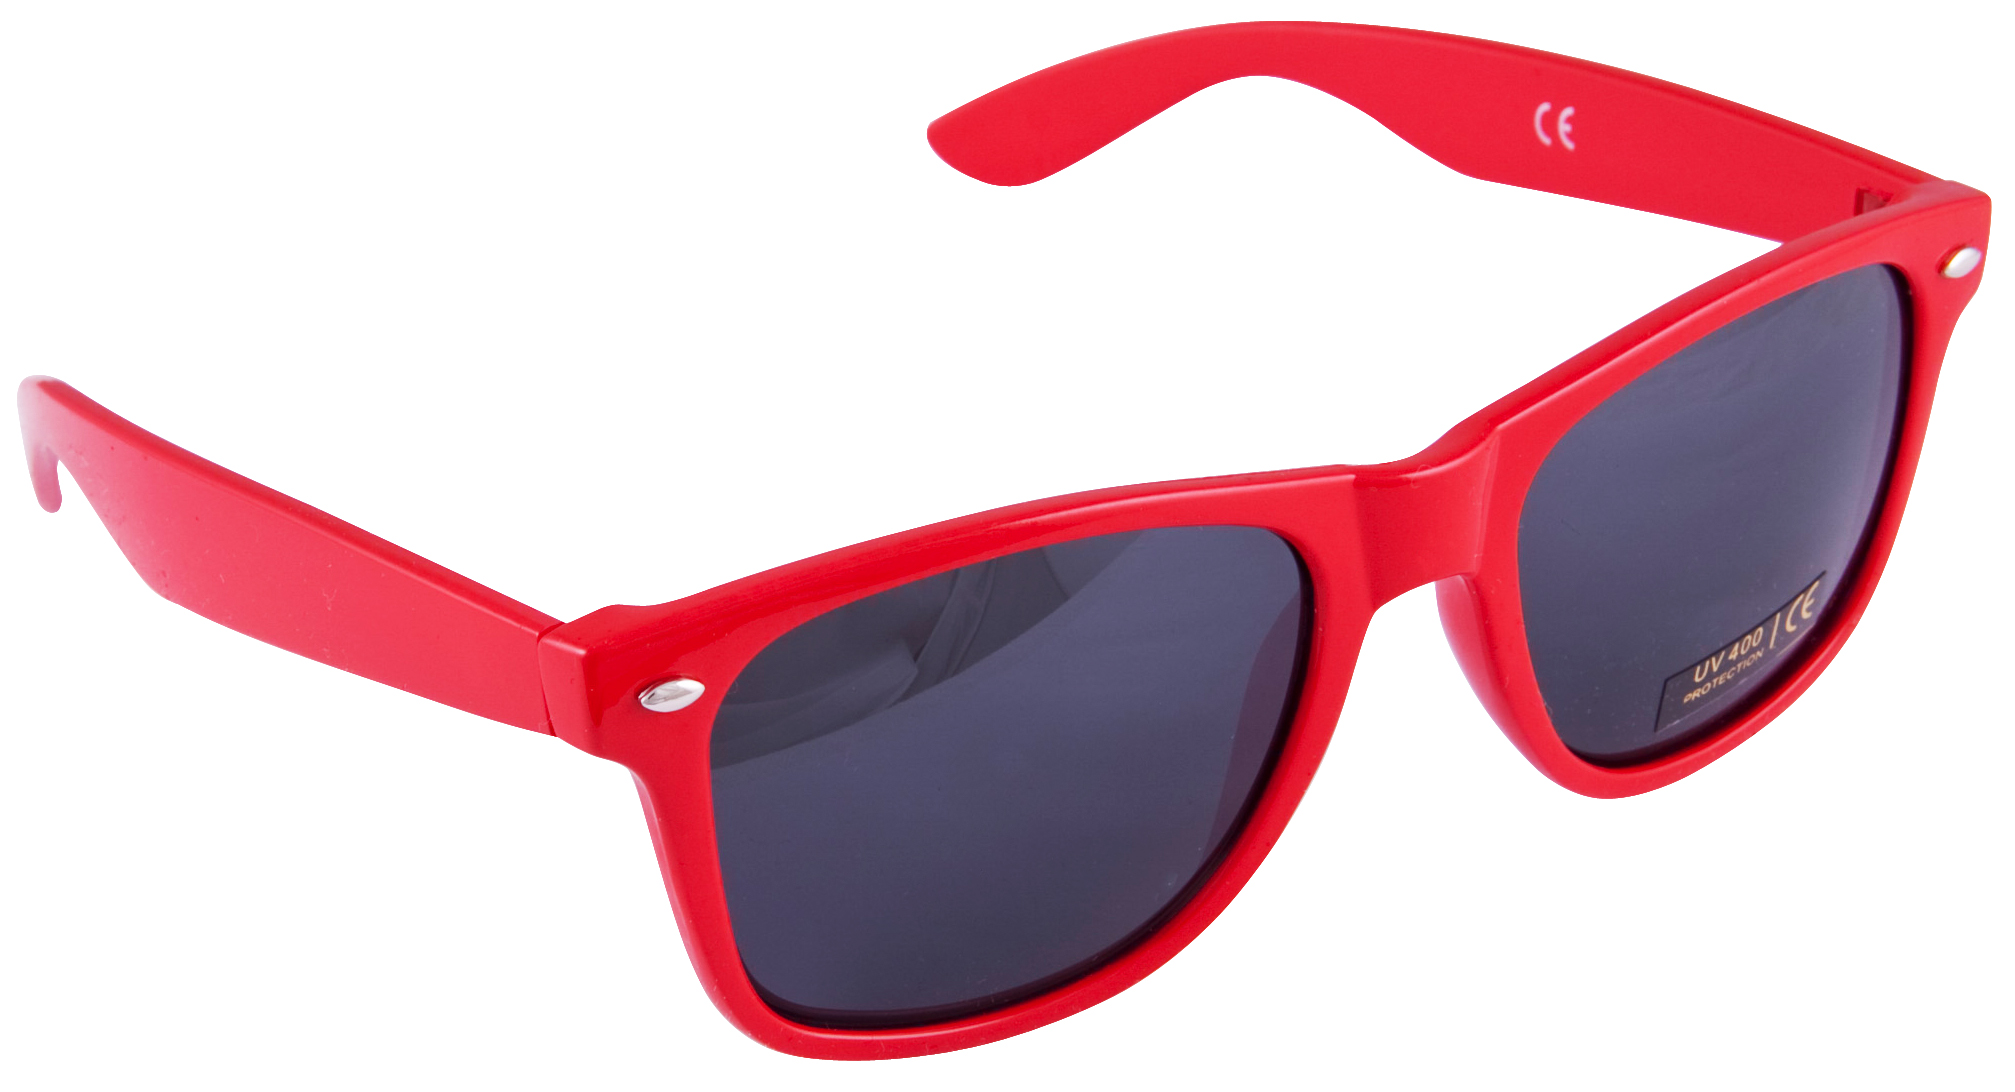 40 Sunglasses Pics Free Cliparts That You Can Download To You Computer